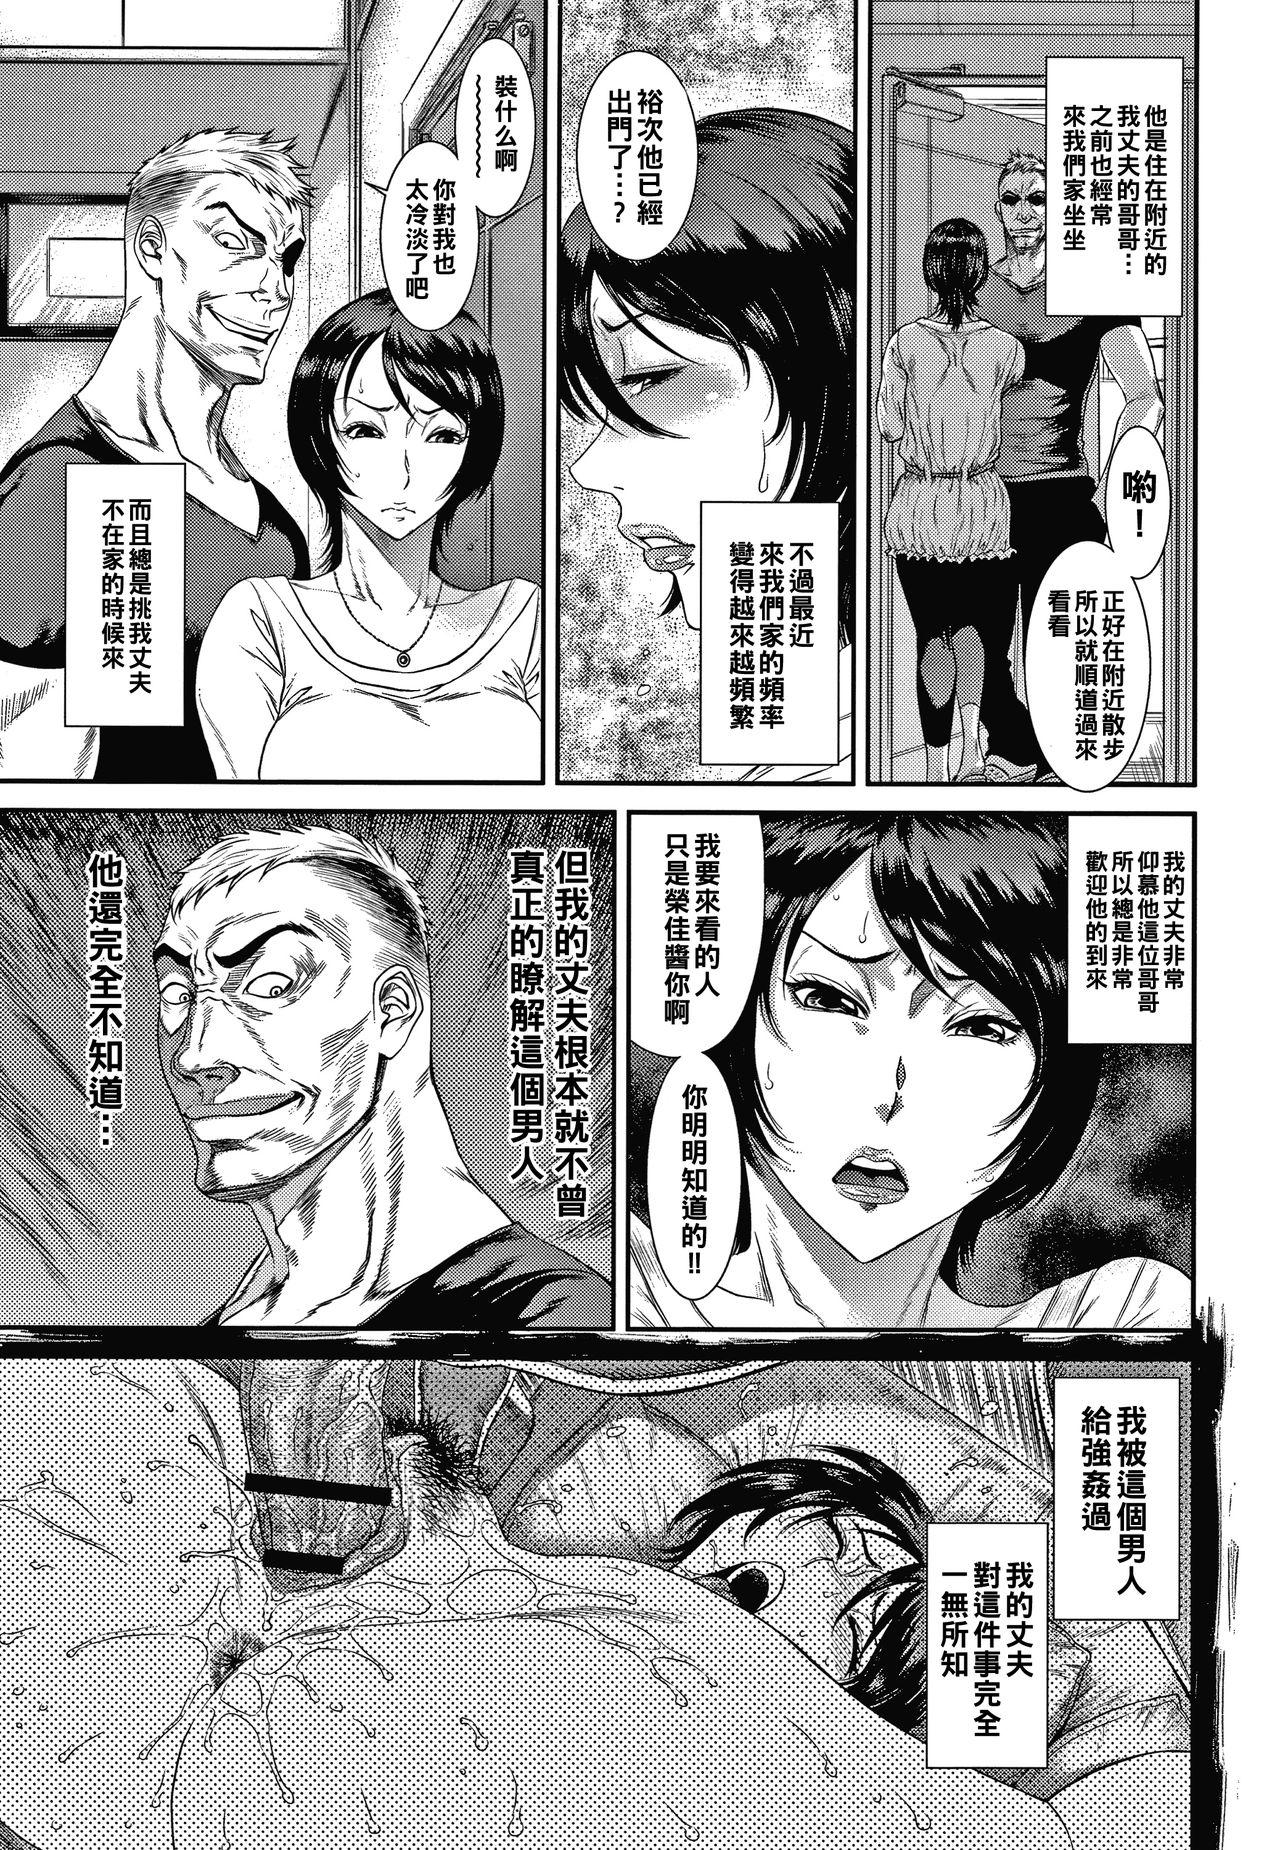 Virgin 罪悪感と快楽主義（Chinese） Cut - Page 5